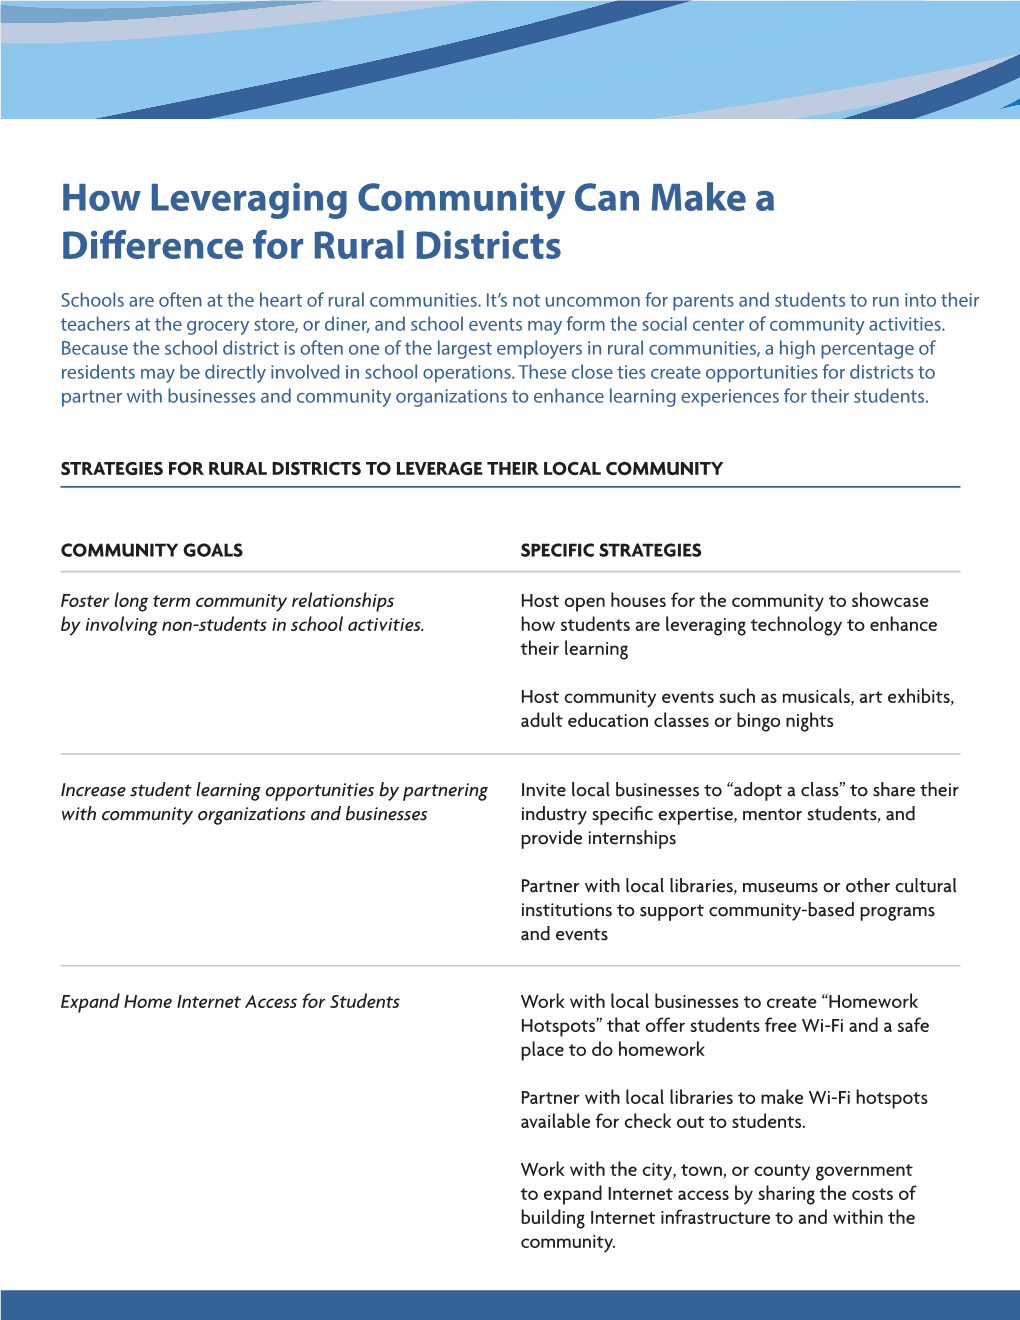 How Leveraging Community Can Make a Difference for Rural Districts